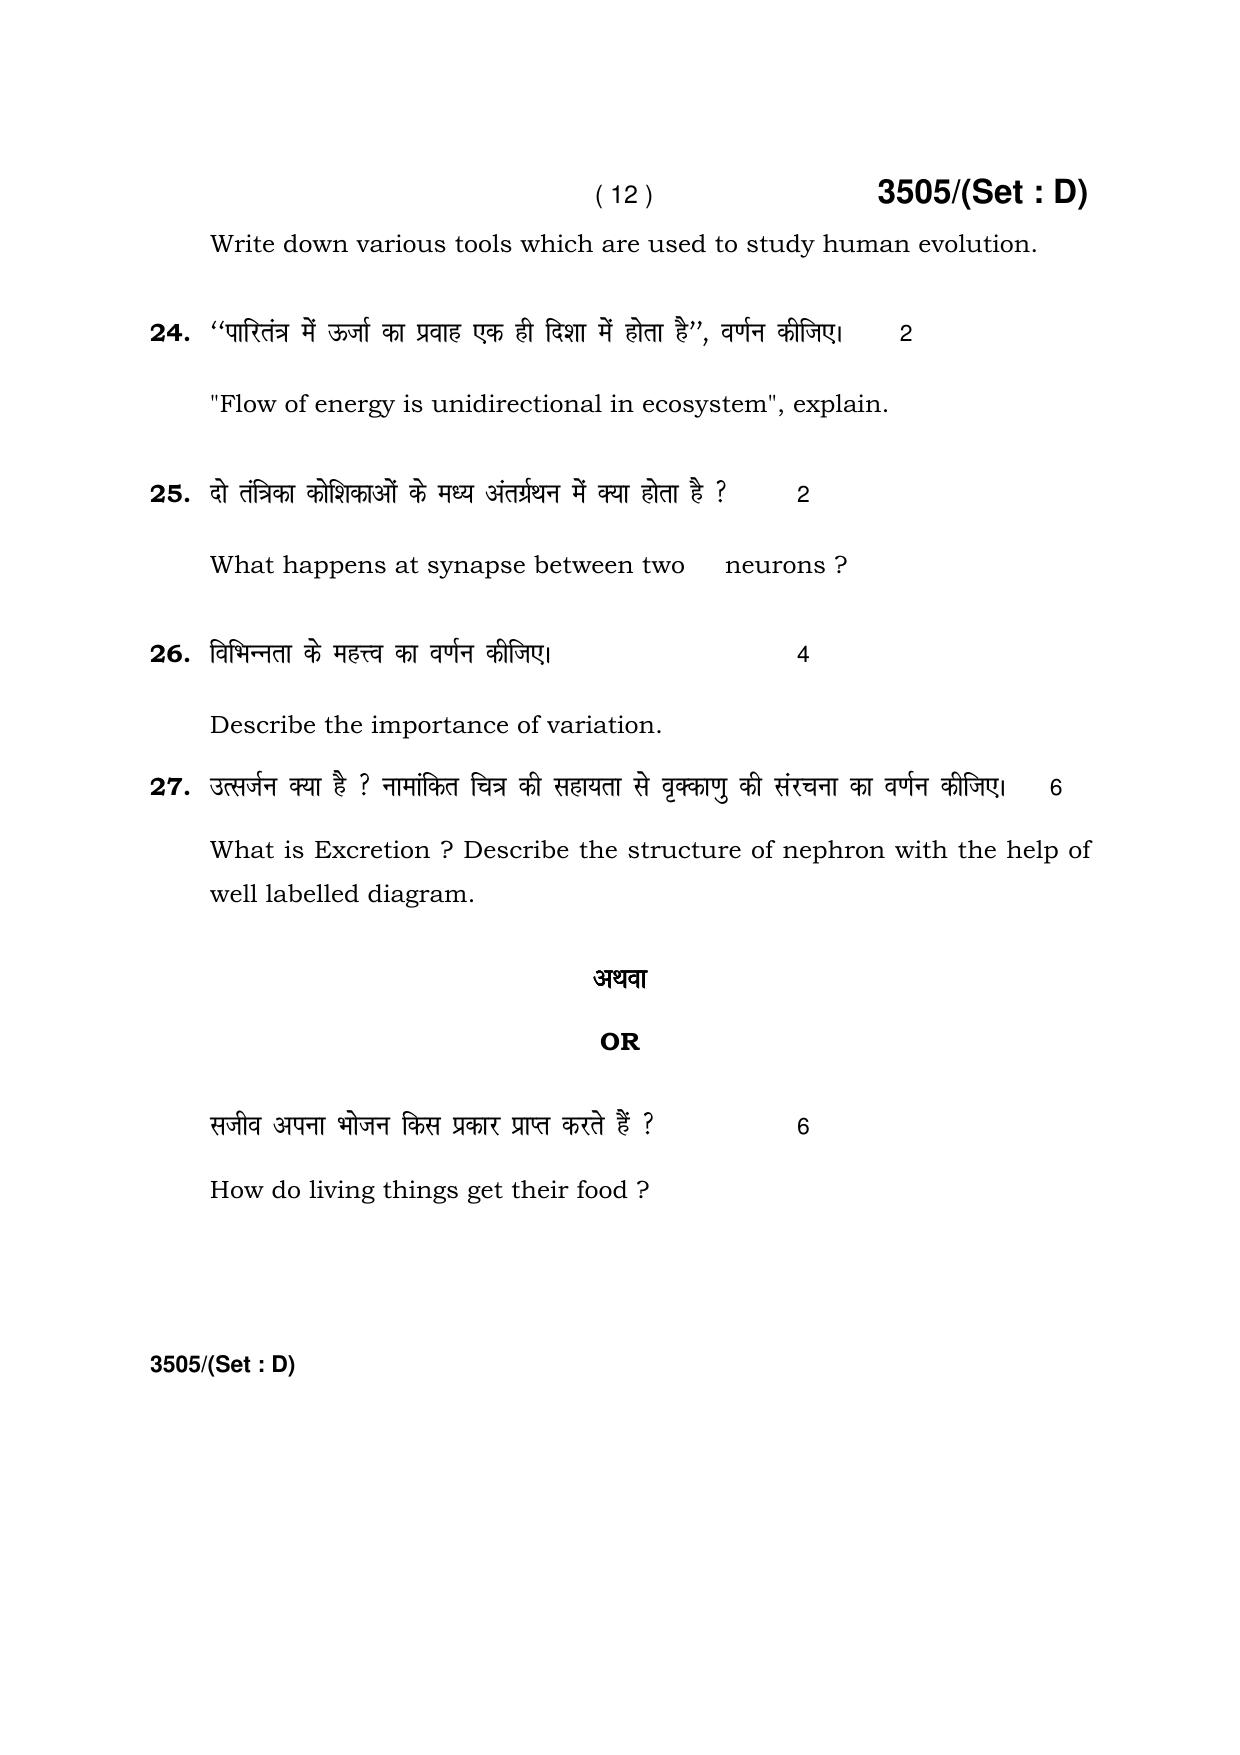 Haryana Board HBSE Class 10 Science -D 2018 Question Paper - Page 12